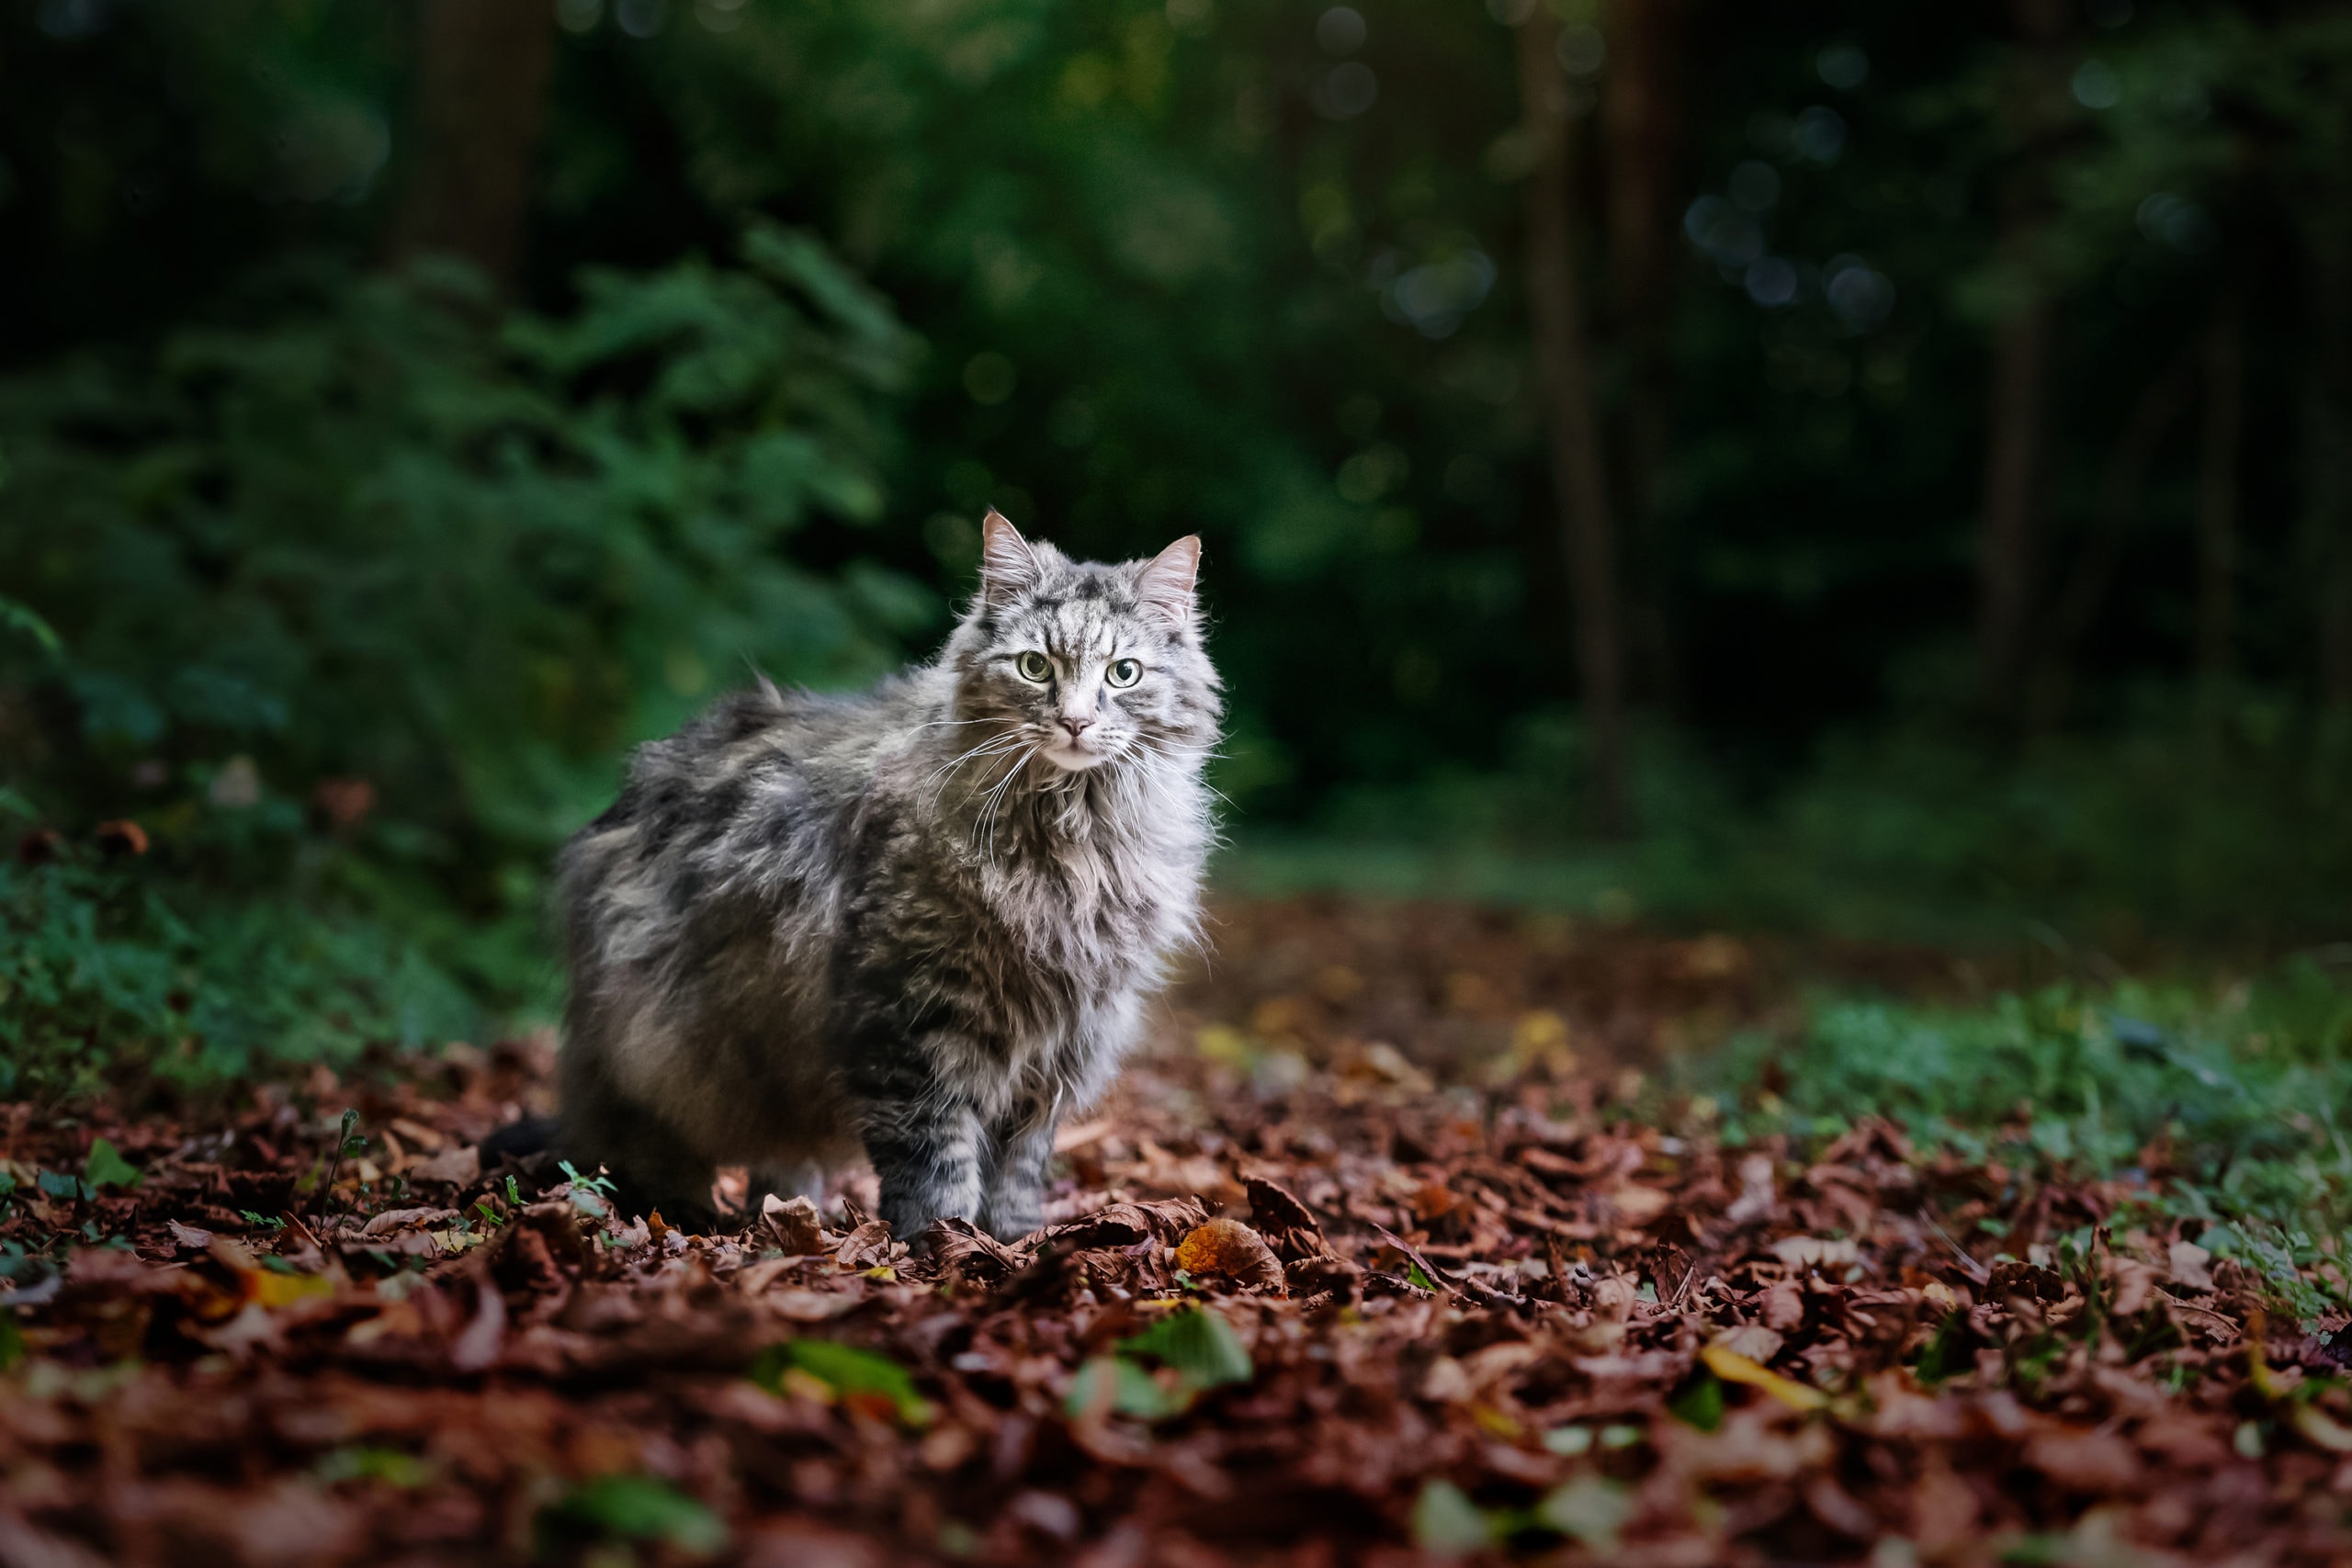 Cat Photography in East Grinstead – extraordinary cat portraits in Kent, Sussex and Surrey